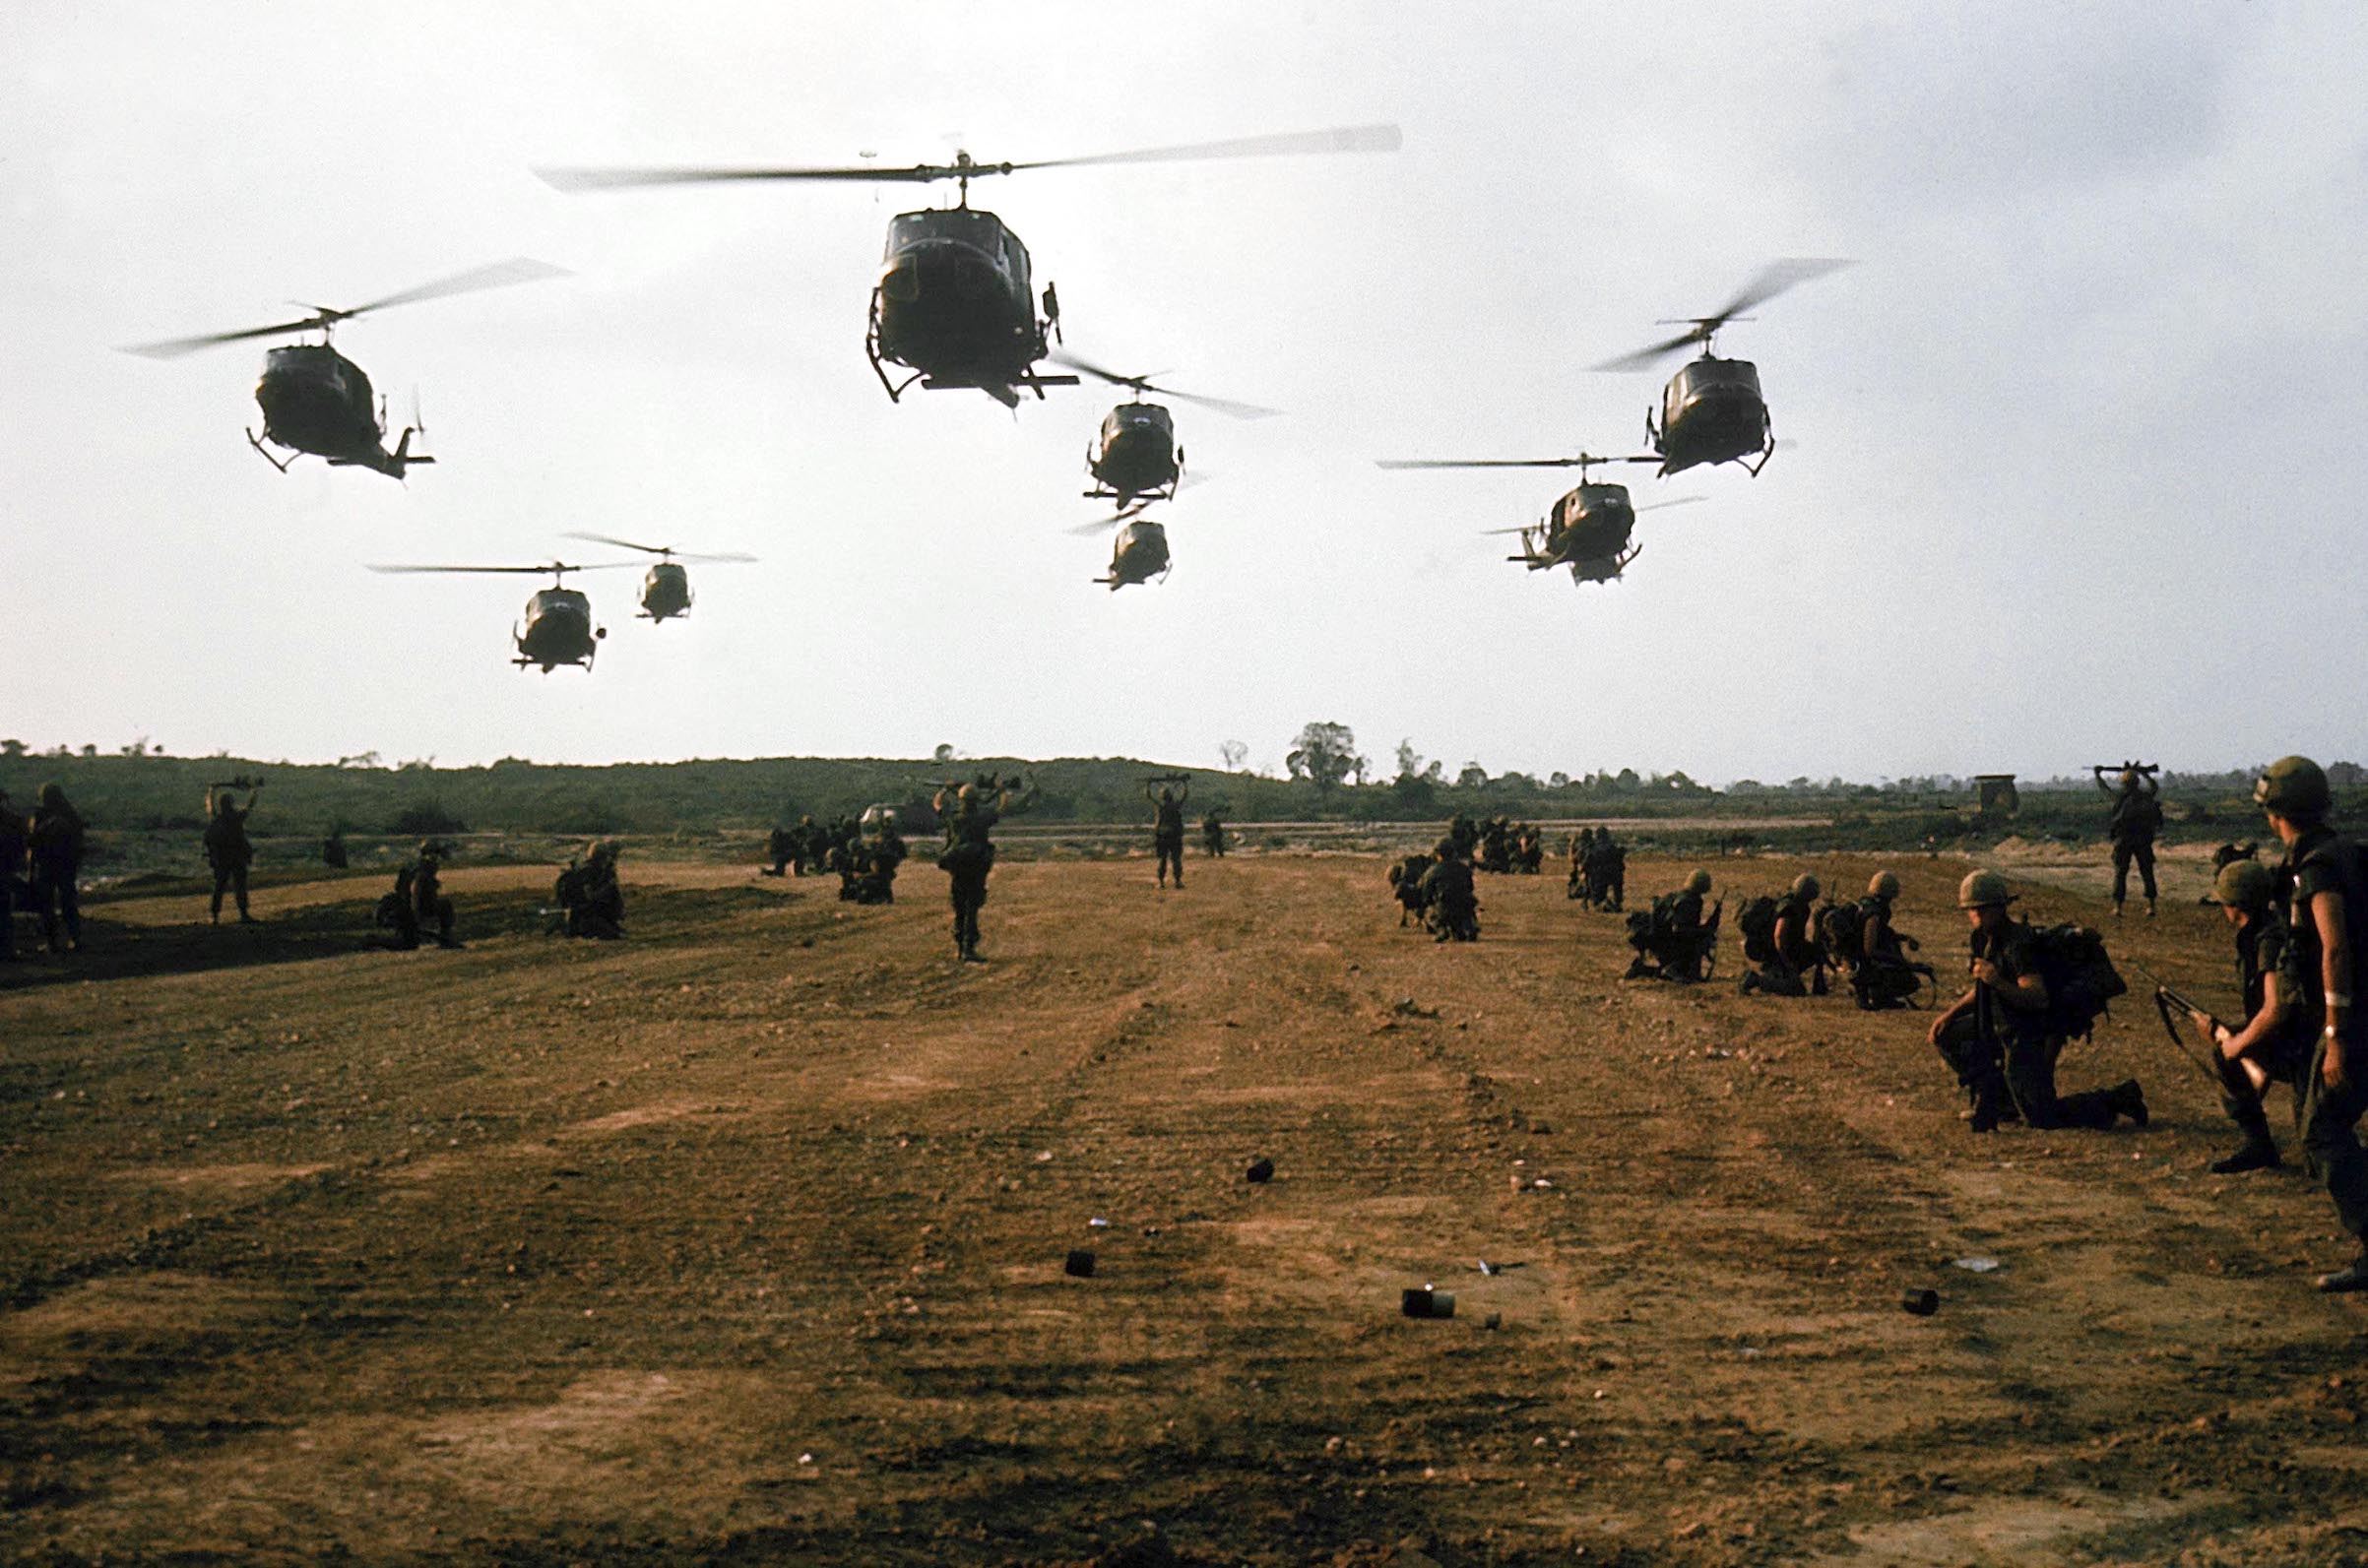 American military Bell UH-1D Iroquois ("Huey") helicopters in flight during the My Lai massacre on March 16, 1968 in My Lai, South Vietnam. (Ronald S. Haeberle—The LIFE Images Collection/Getty Images)